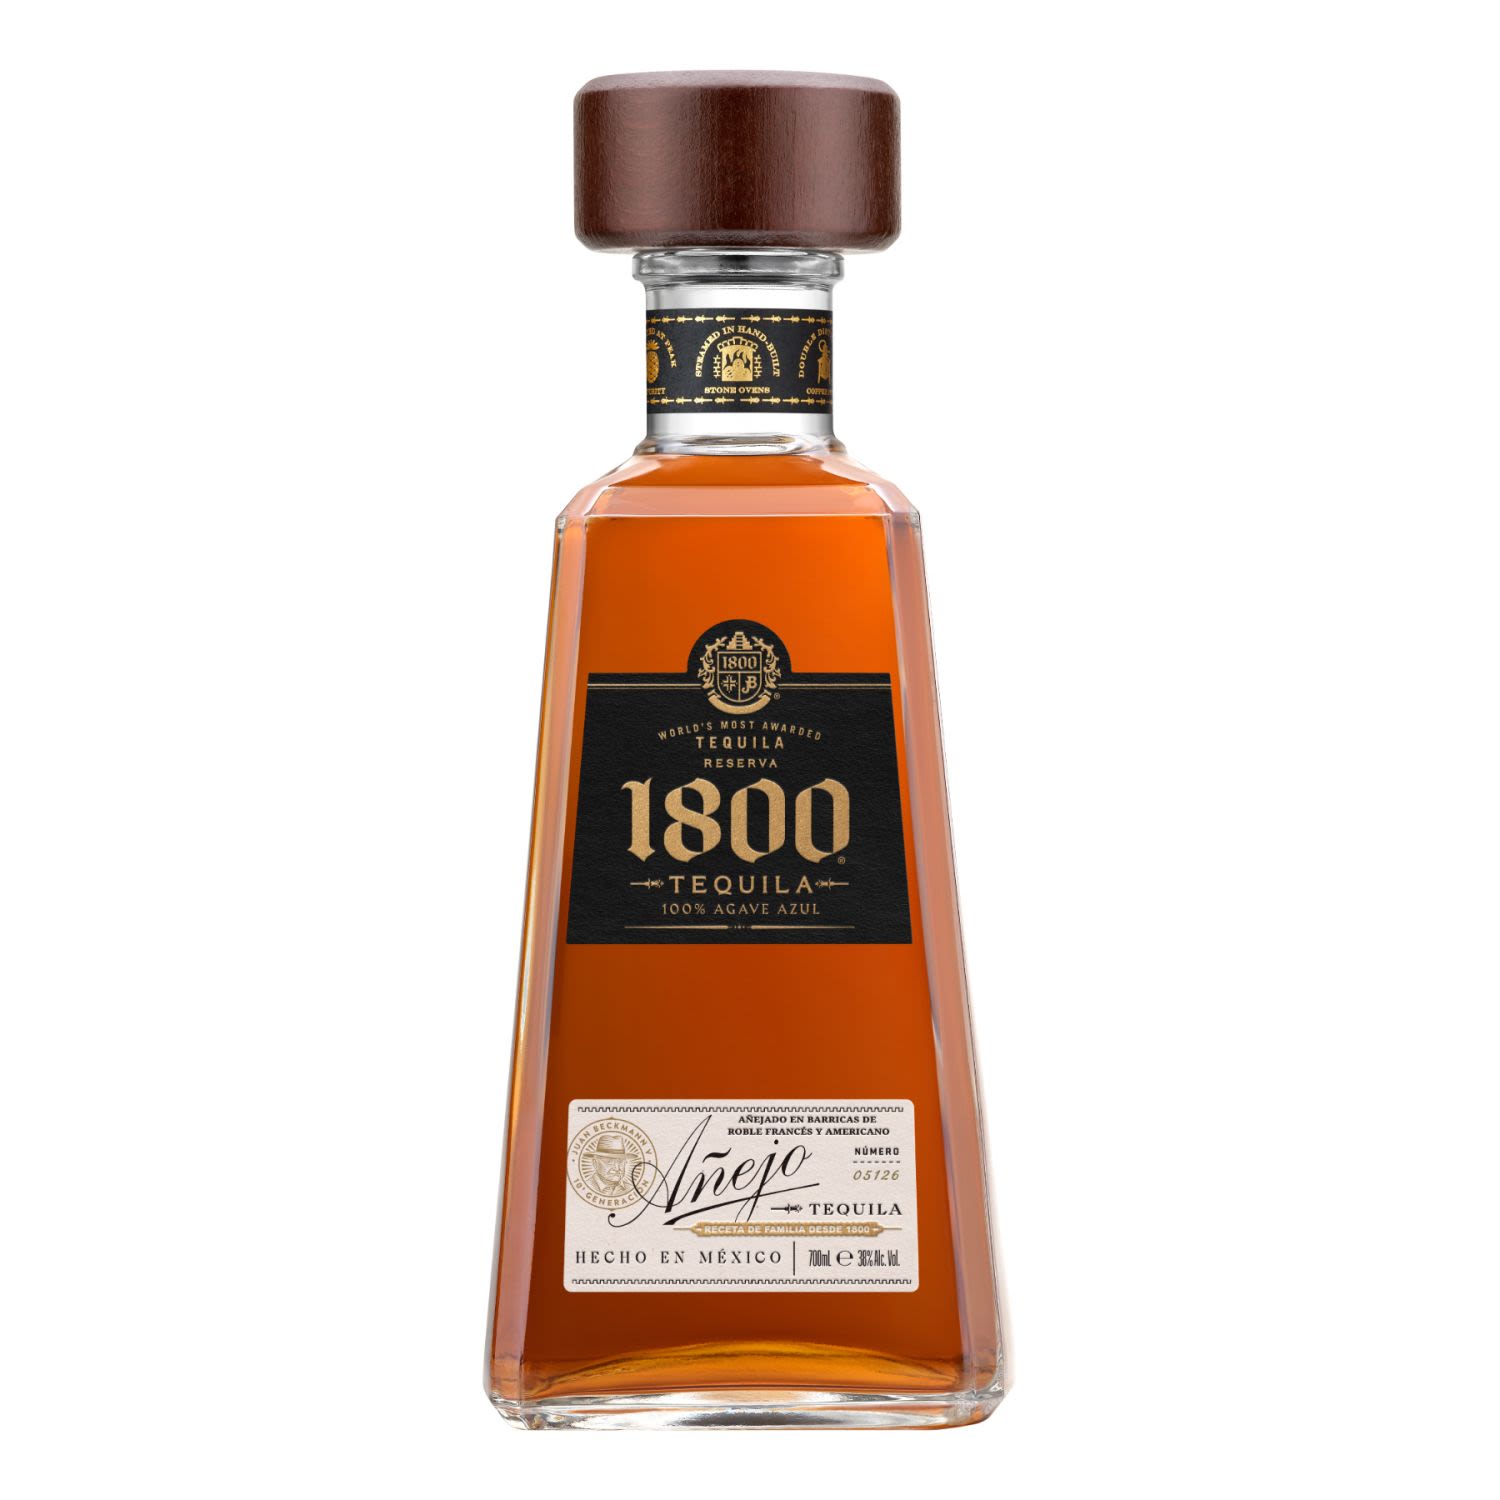 1800 Anejo Tequila has a dark amber colour with copper highlights and aromas of toasted oak, vanilla, cinnamon and cloves, layers of butterscotch and chocolate. The palate is rich, showing toasted oak in an elegant marriage of agave and spices that finishes with spicy, long and well rounded flavours. This is aged mostly in small French oak barrels for up to 3 years before release.<br /> <br />Alcohol Volume: 38.00%<br /><br />Pack Format: Bottle<br /><br />Standard Drinks: 21</br /><br />Pack Type: Bottle<br />